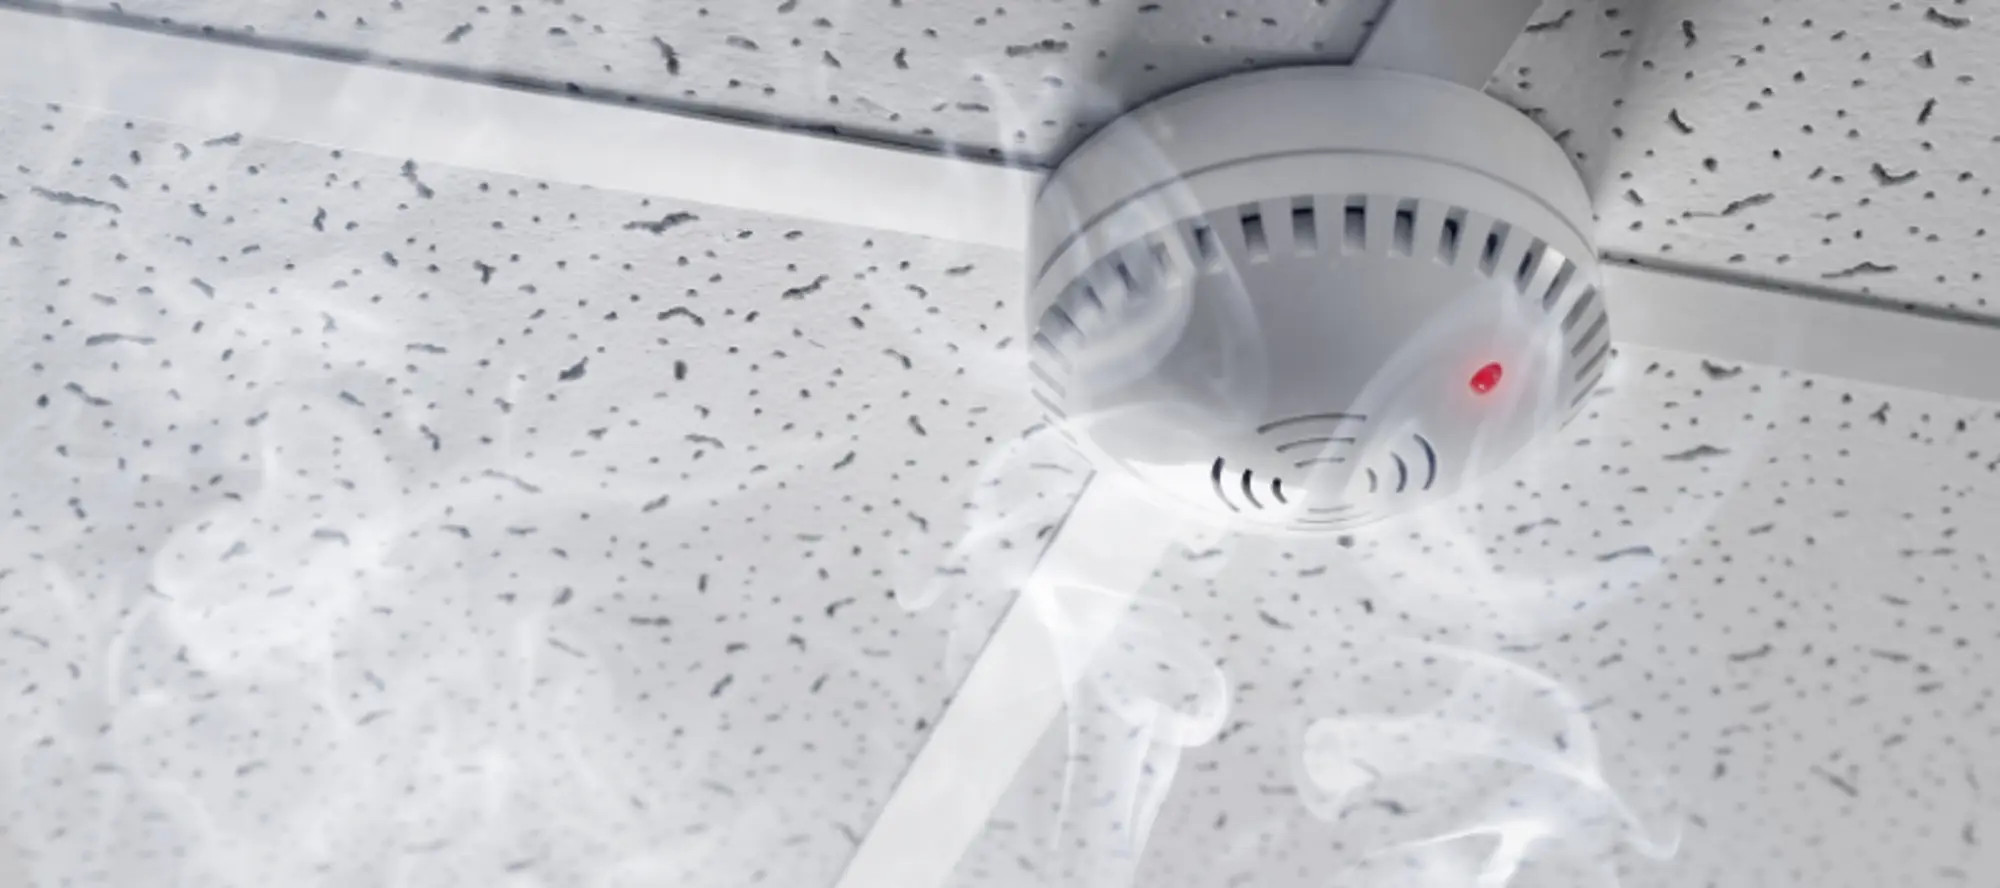 Smoke detector in care home fire safety